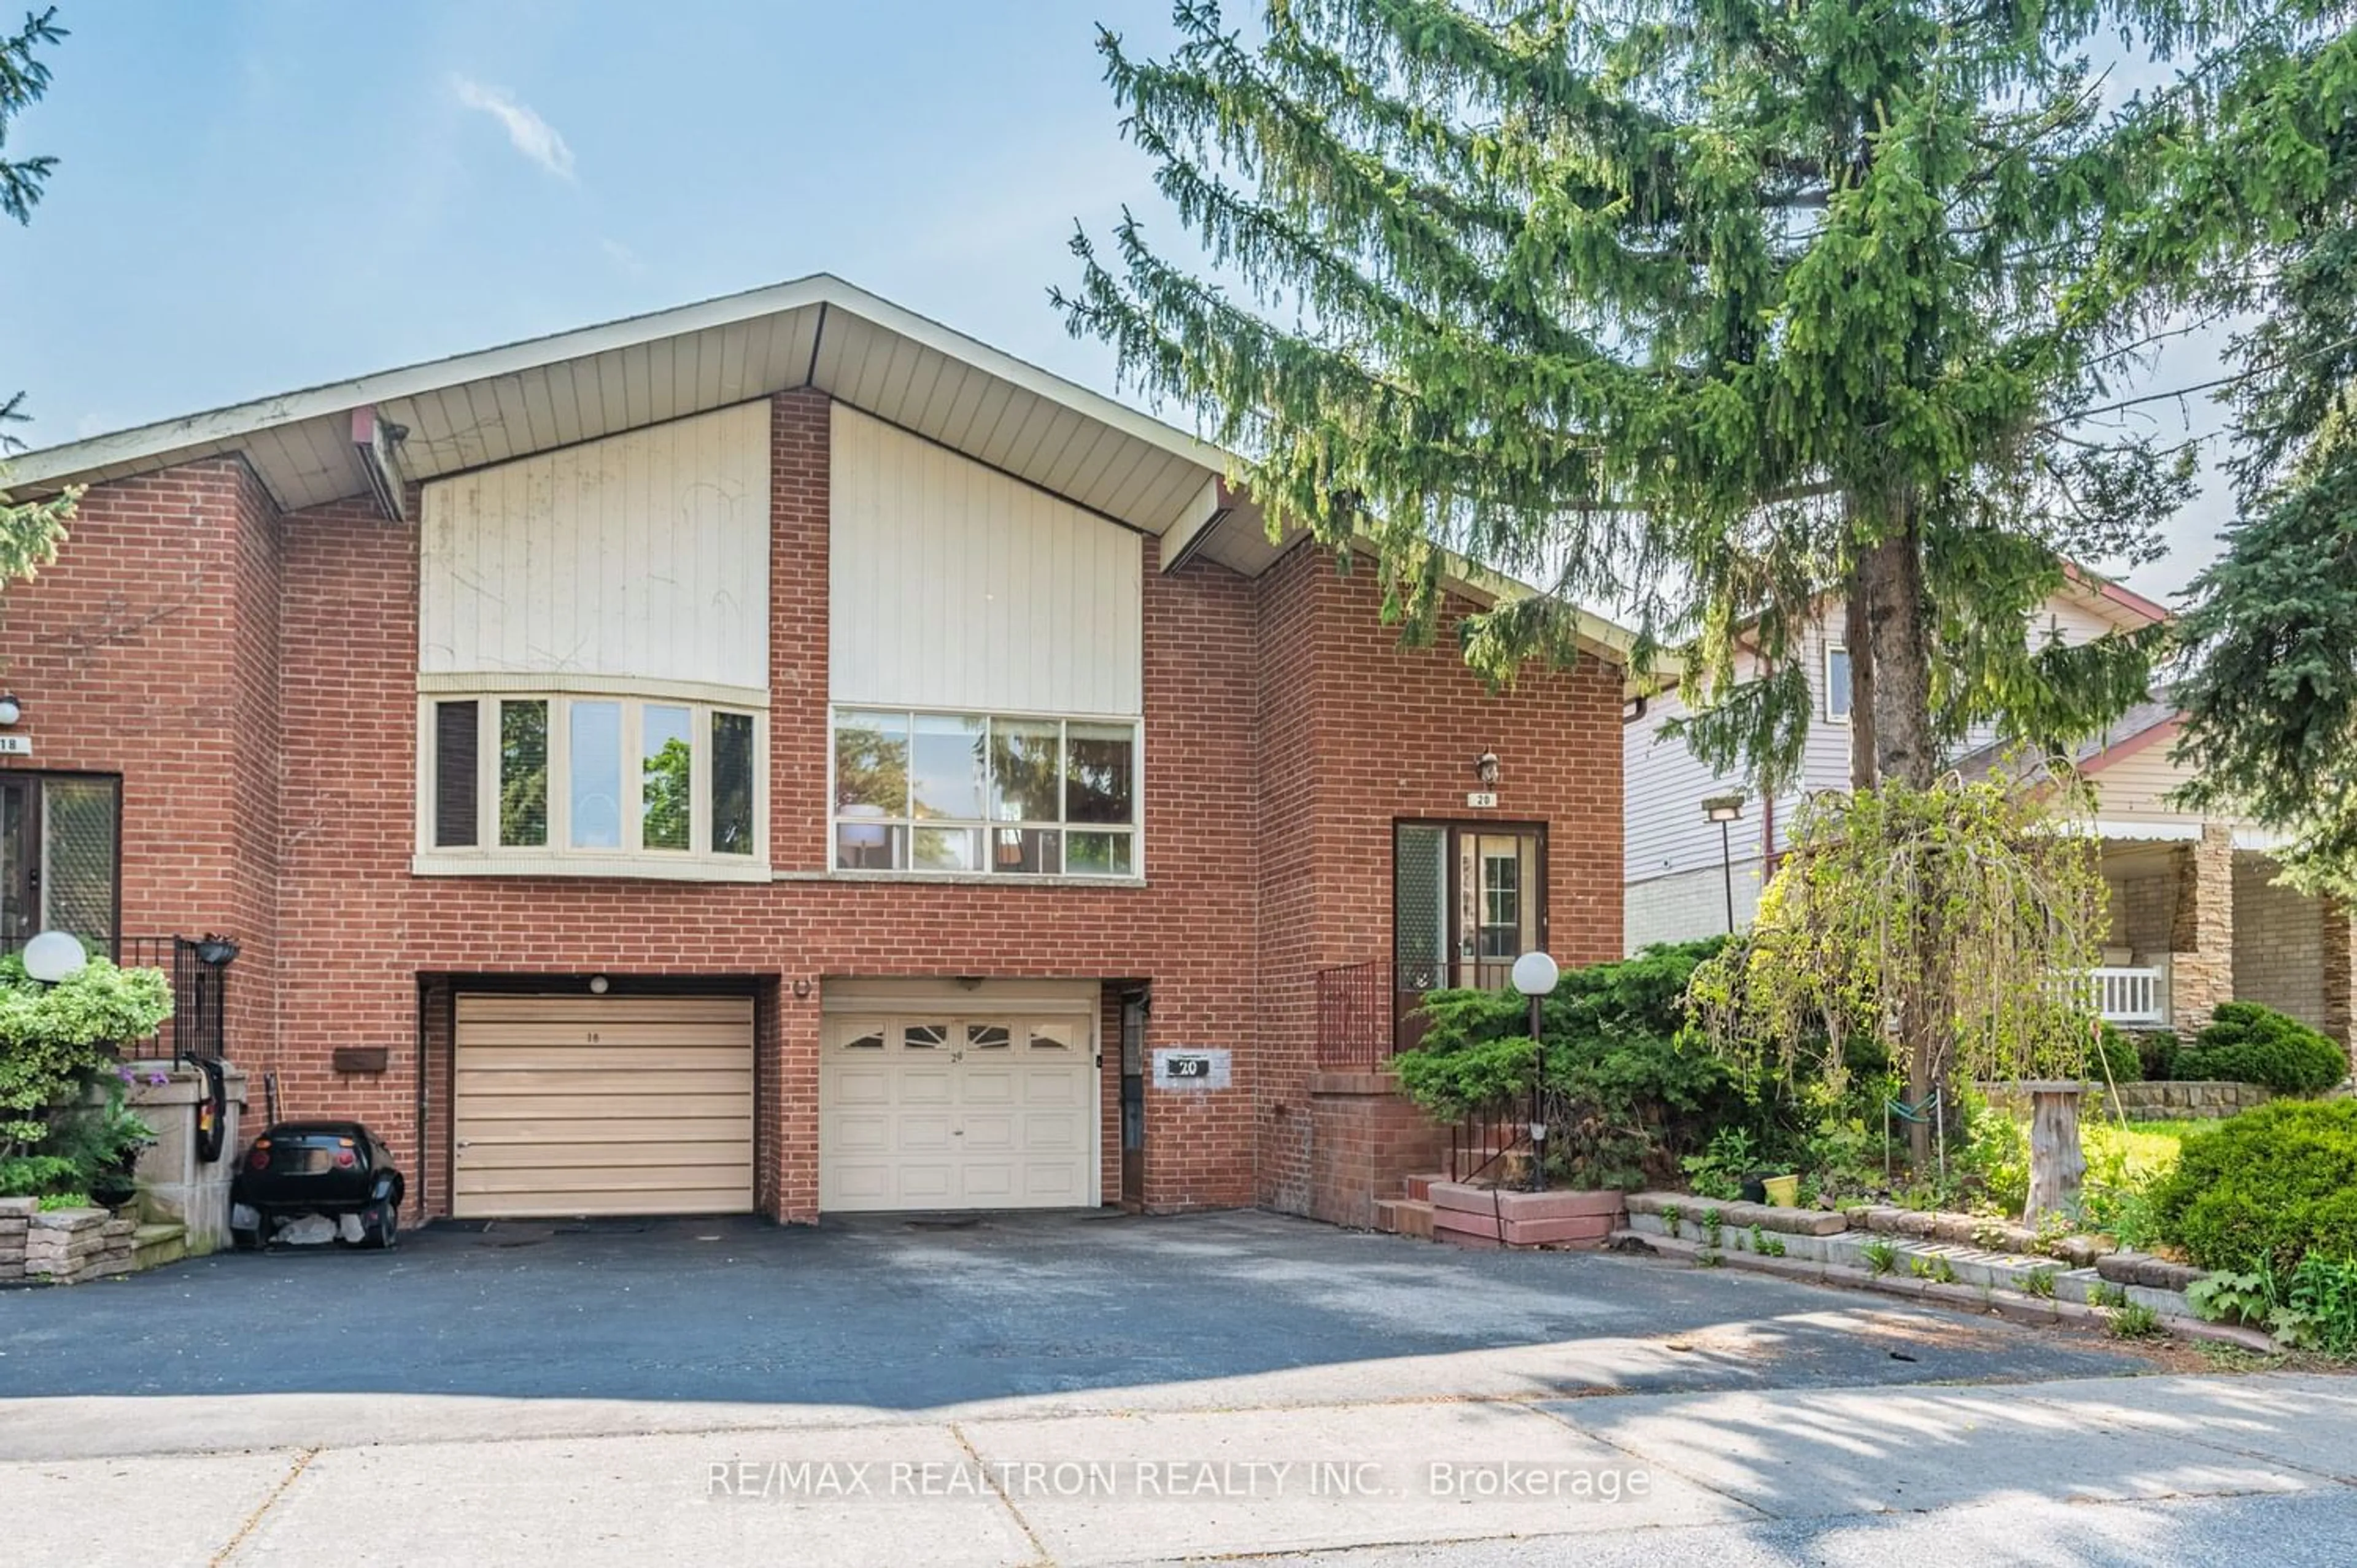 Home with brick exterior material for 20 Greenspire Rd, Toronto Ontario M1B 1Y8